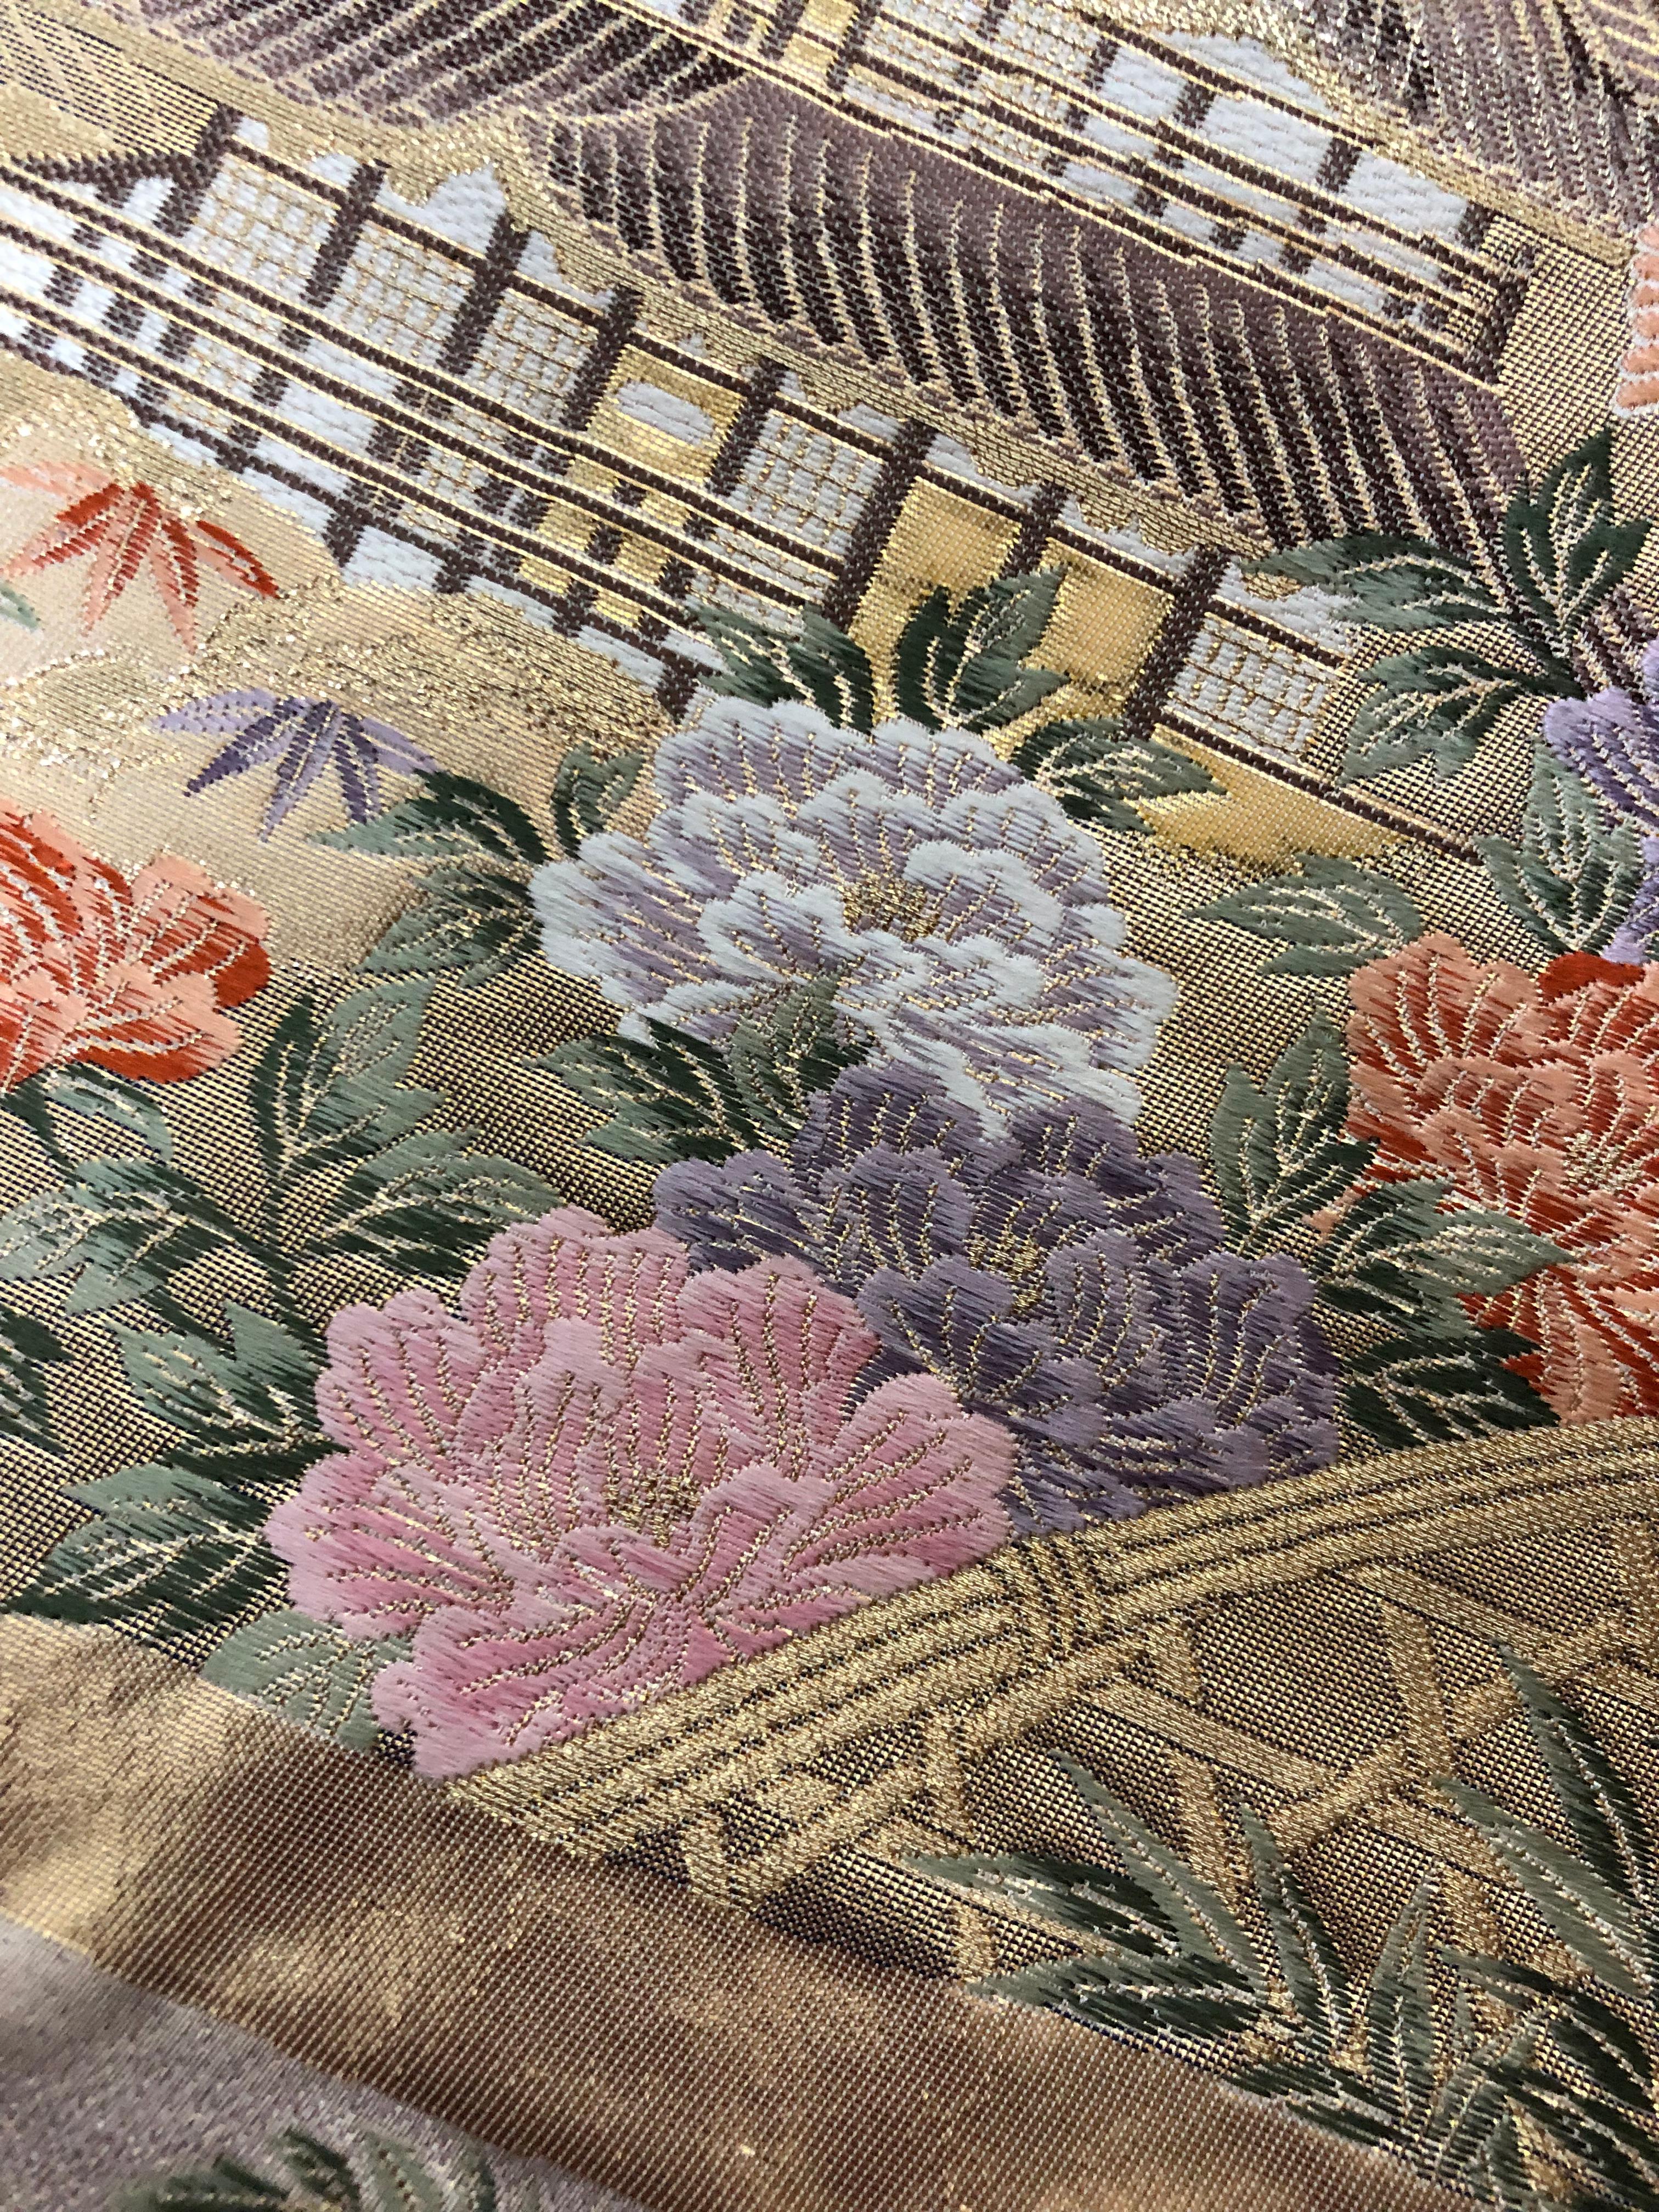 Silk Kimono Art / Japanese Art / Wall Decoration -Temple Garden in a Riot of Blooms- For Sale